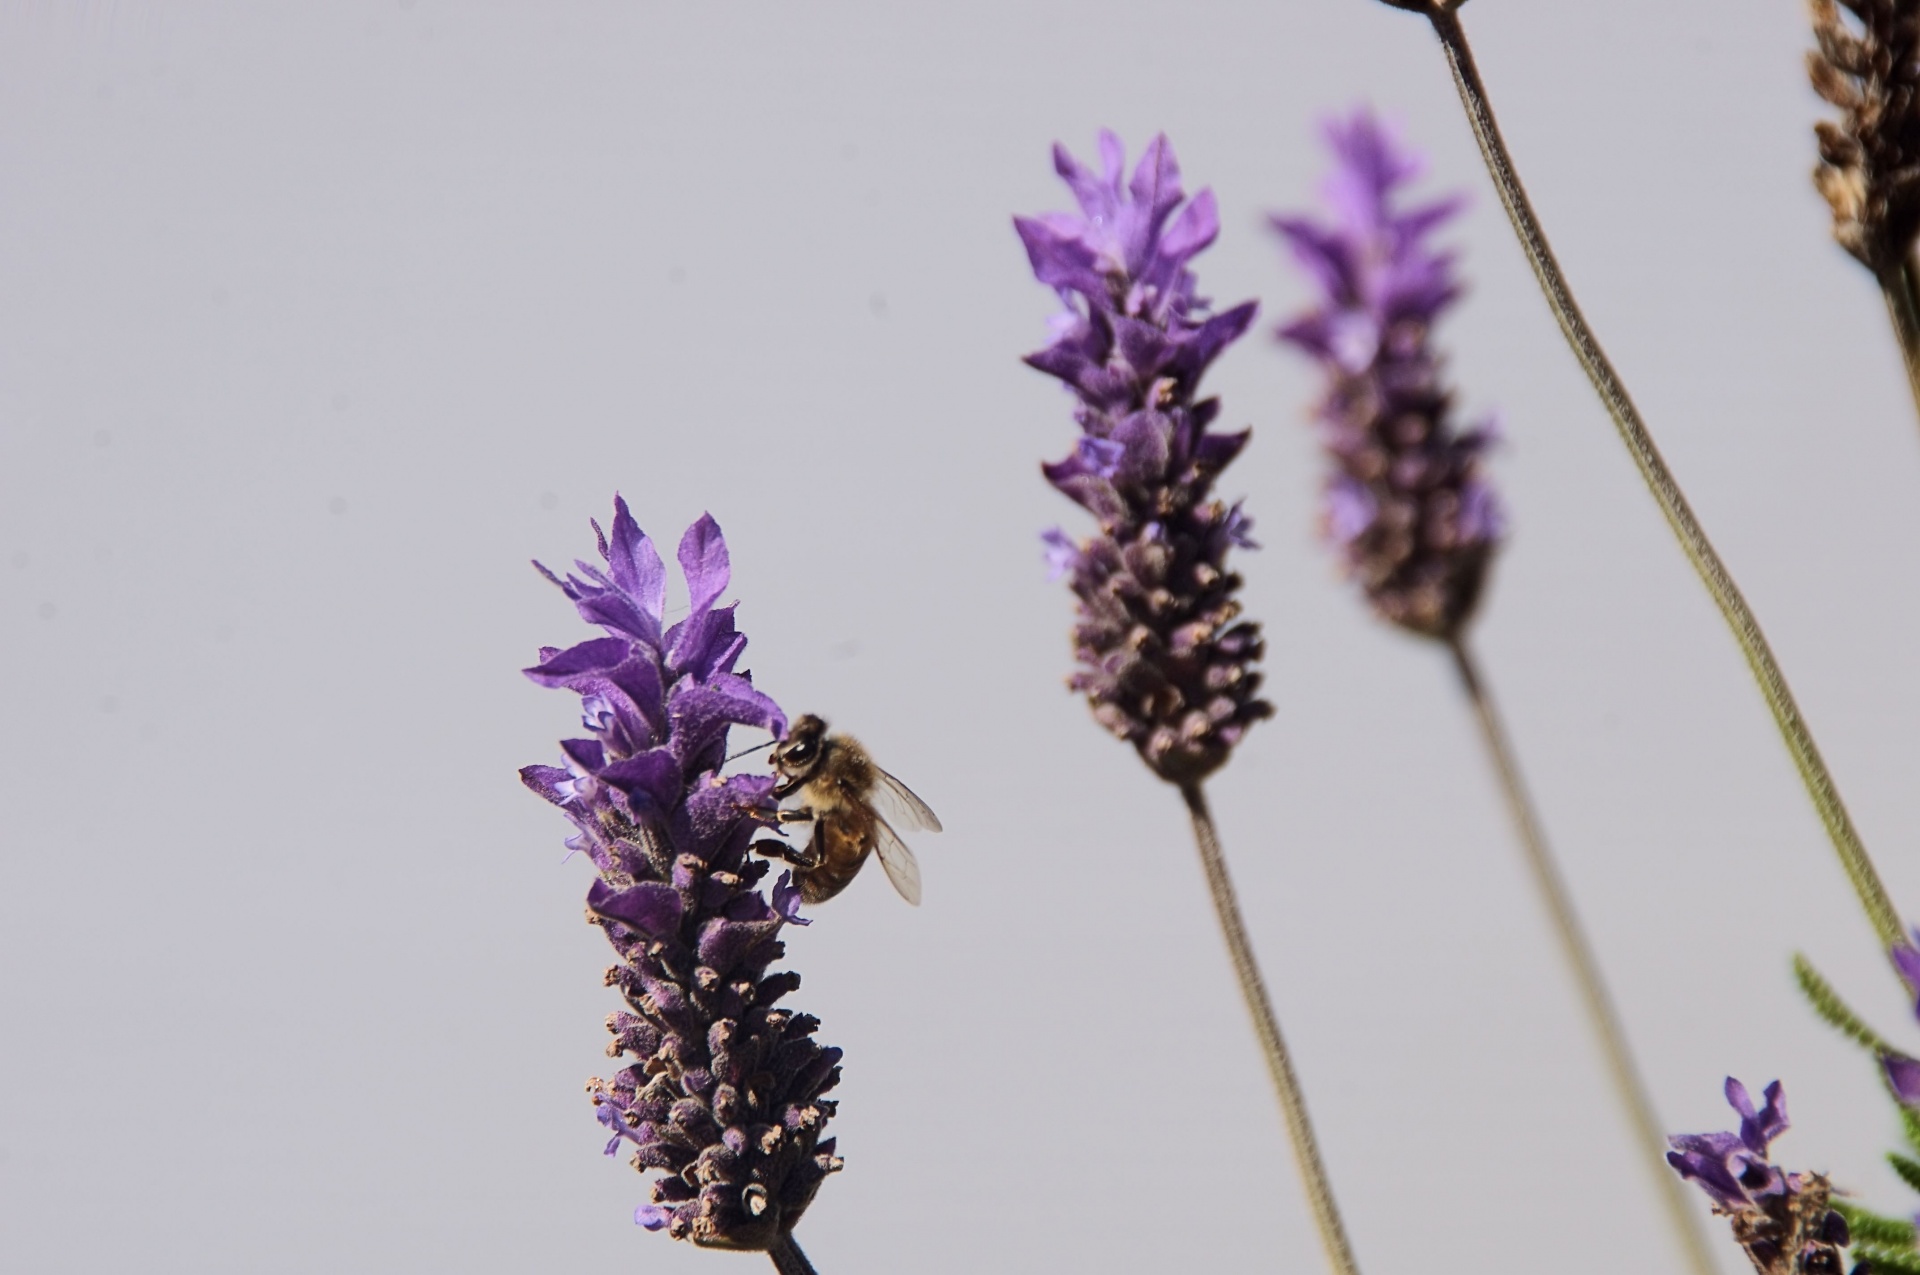 Bee and lavender flowers against white background